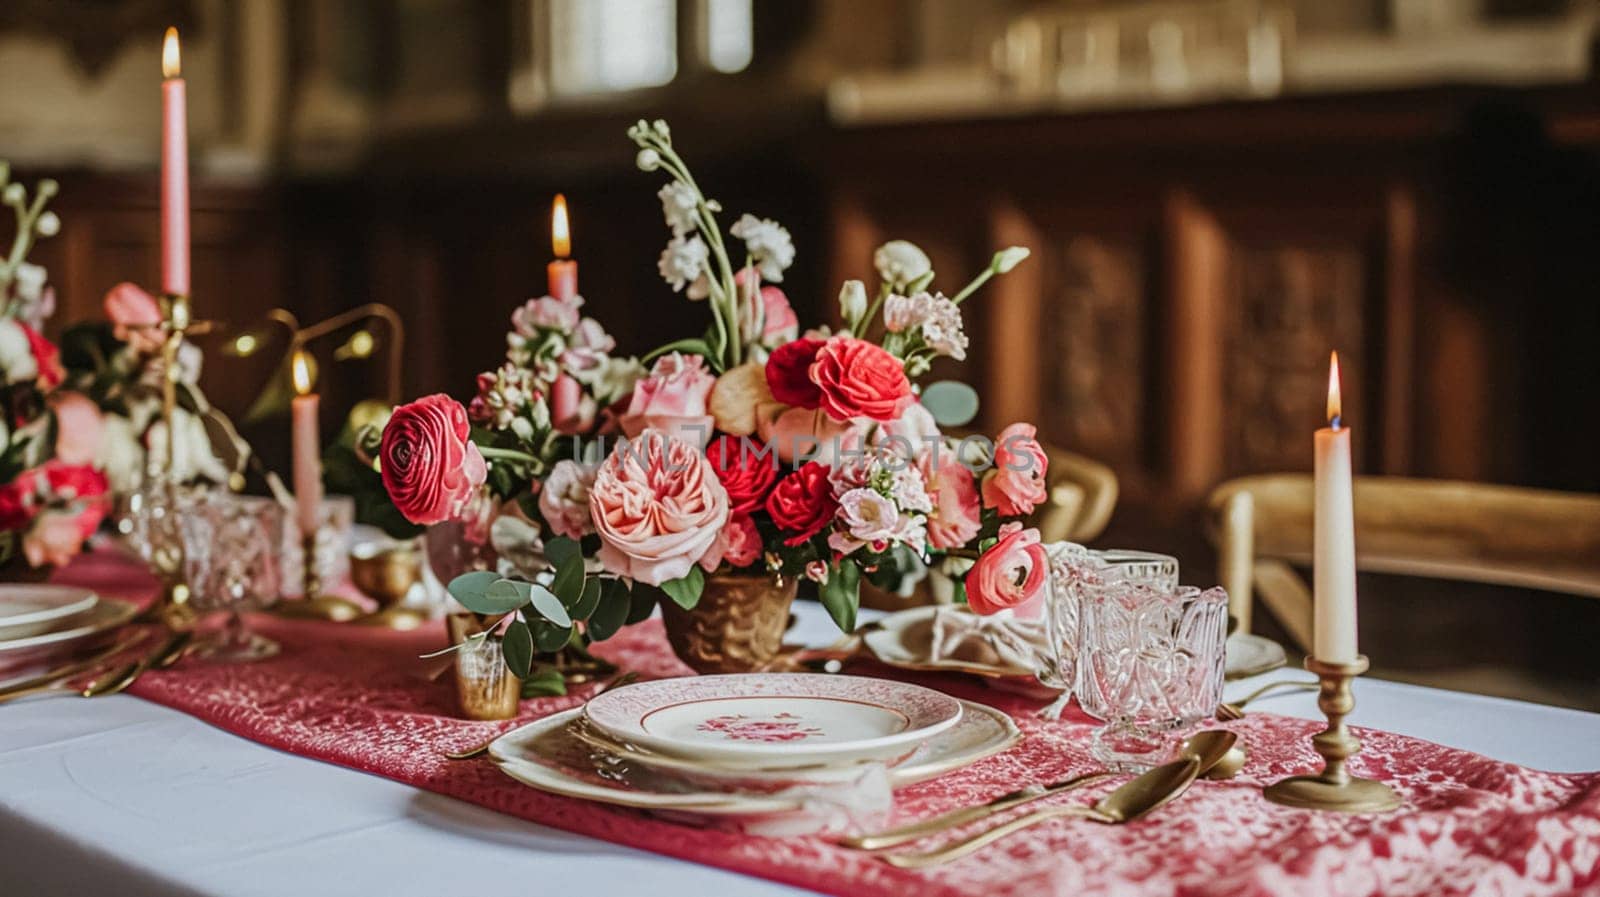 Valentines day tablescape and table decor, romantic table setting with flowers, formal dinner and date, beautiful cutlery and tableware by Anneleven